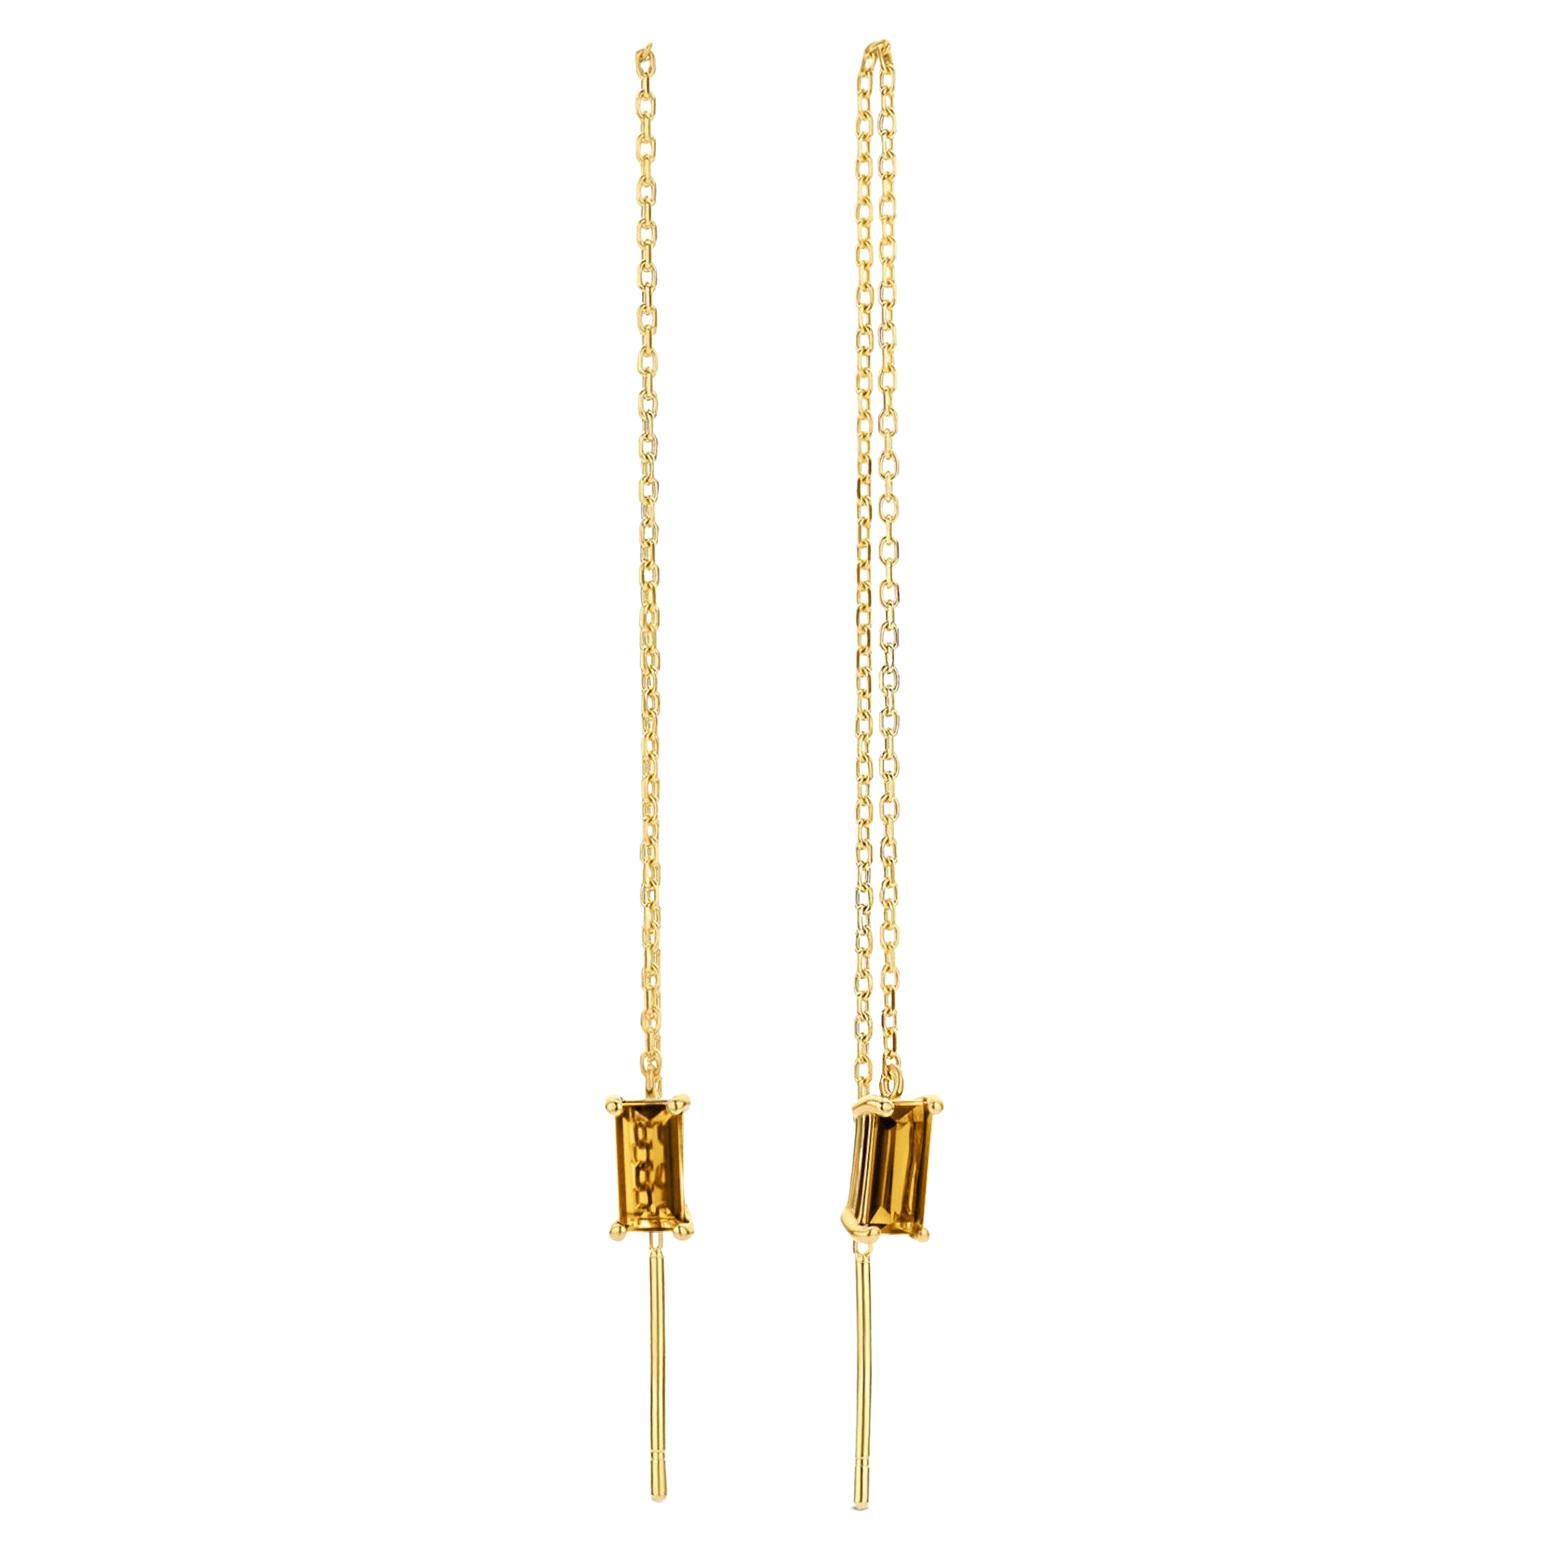 14k Solid Gold Drop Earrings with Citrine, Chain Gold Earrings